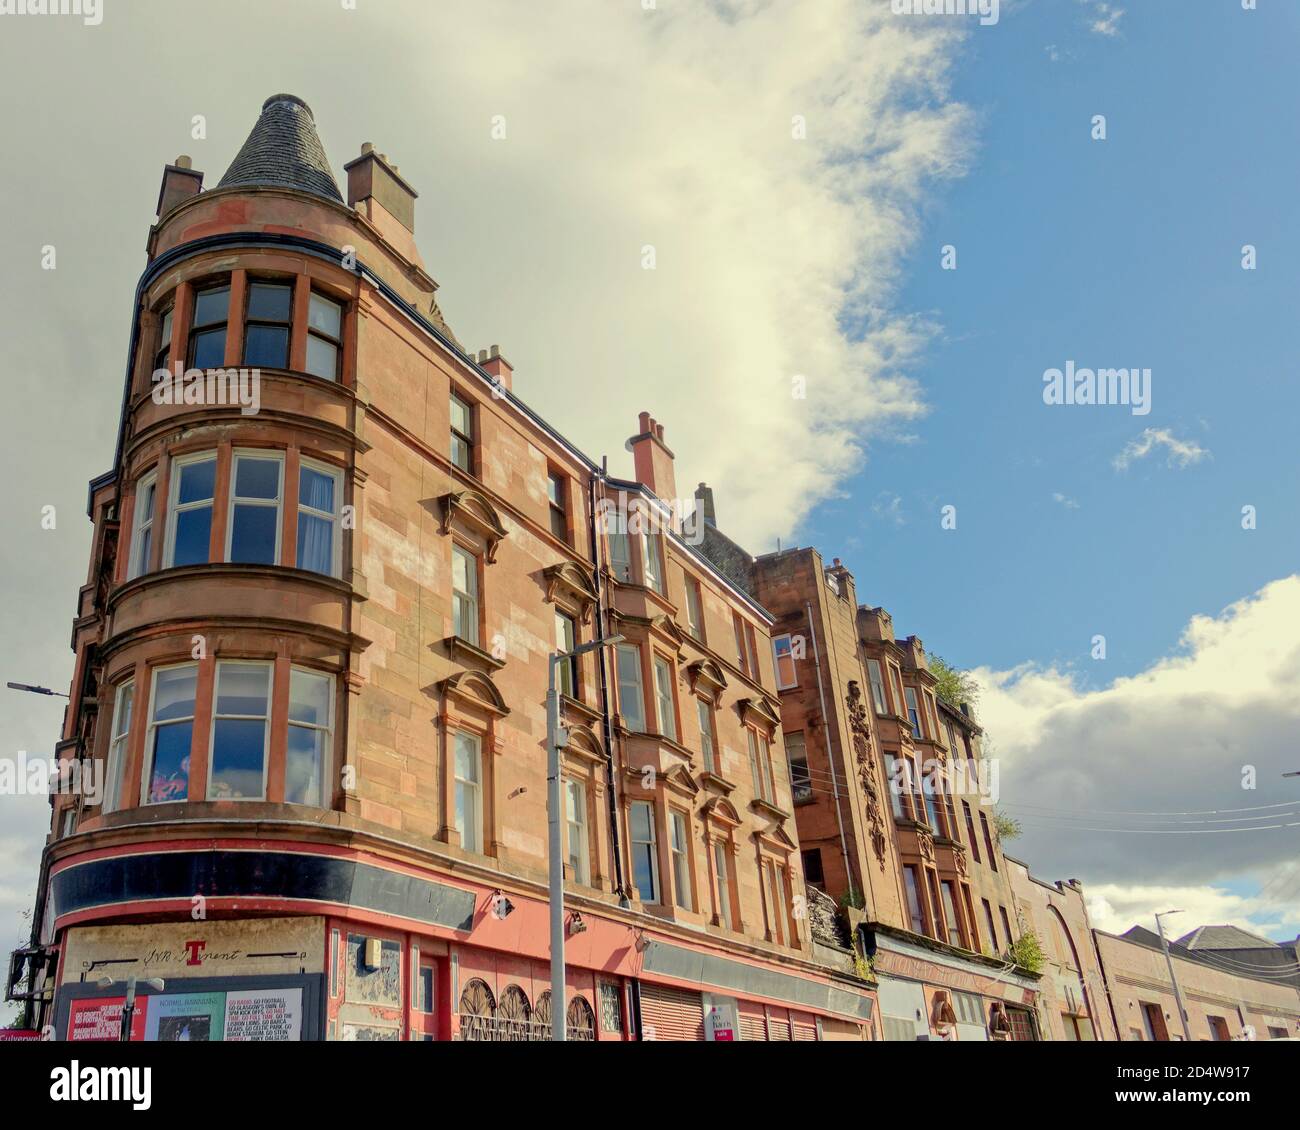 Glasgow, Scotland, UK, 11th October, 2020:Dennistoun voted eighth best place in the world to live by time out or eight h coolest  place to live in the world. The gentrification of the east end working class area is reflected in the sites and people,  Credit: Gerard Ferry/Alamy Live News Stock Photo